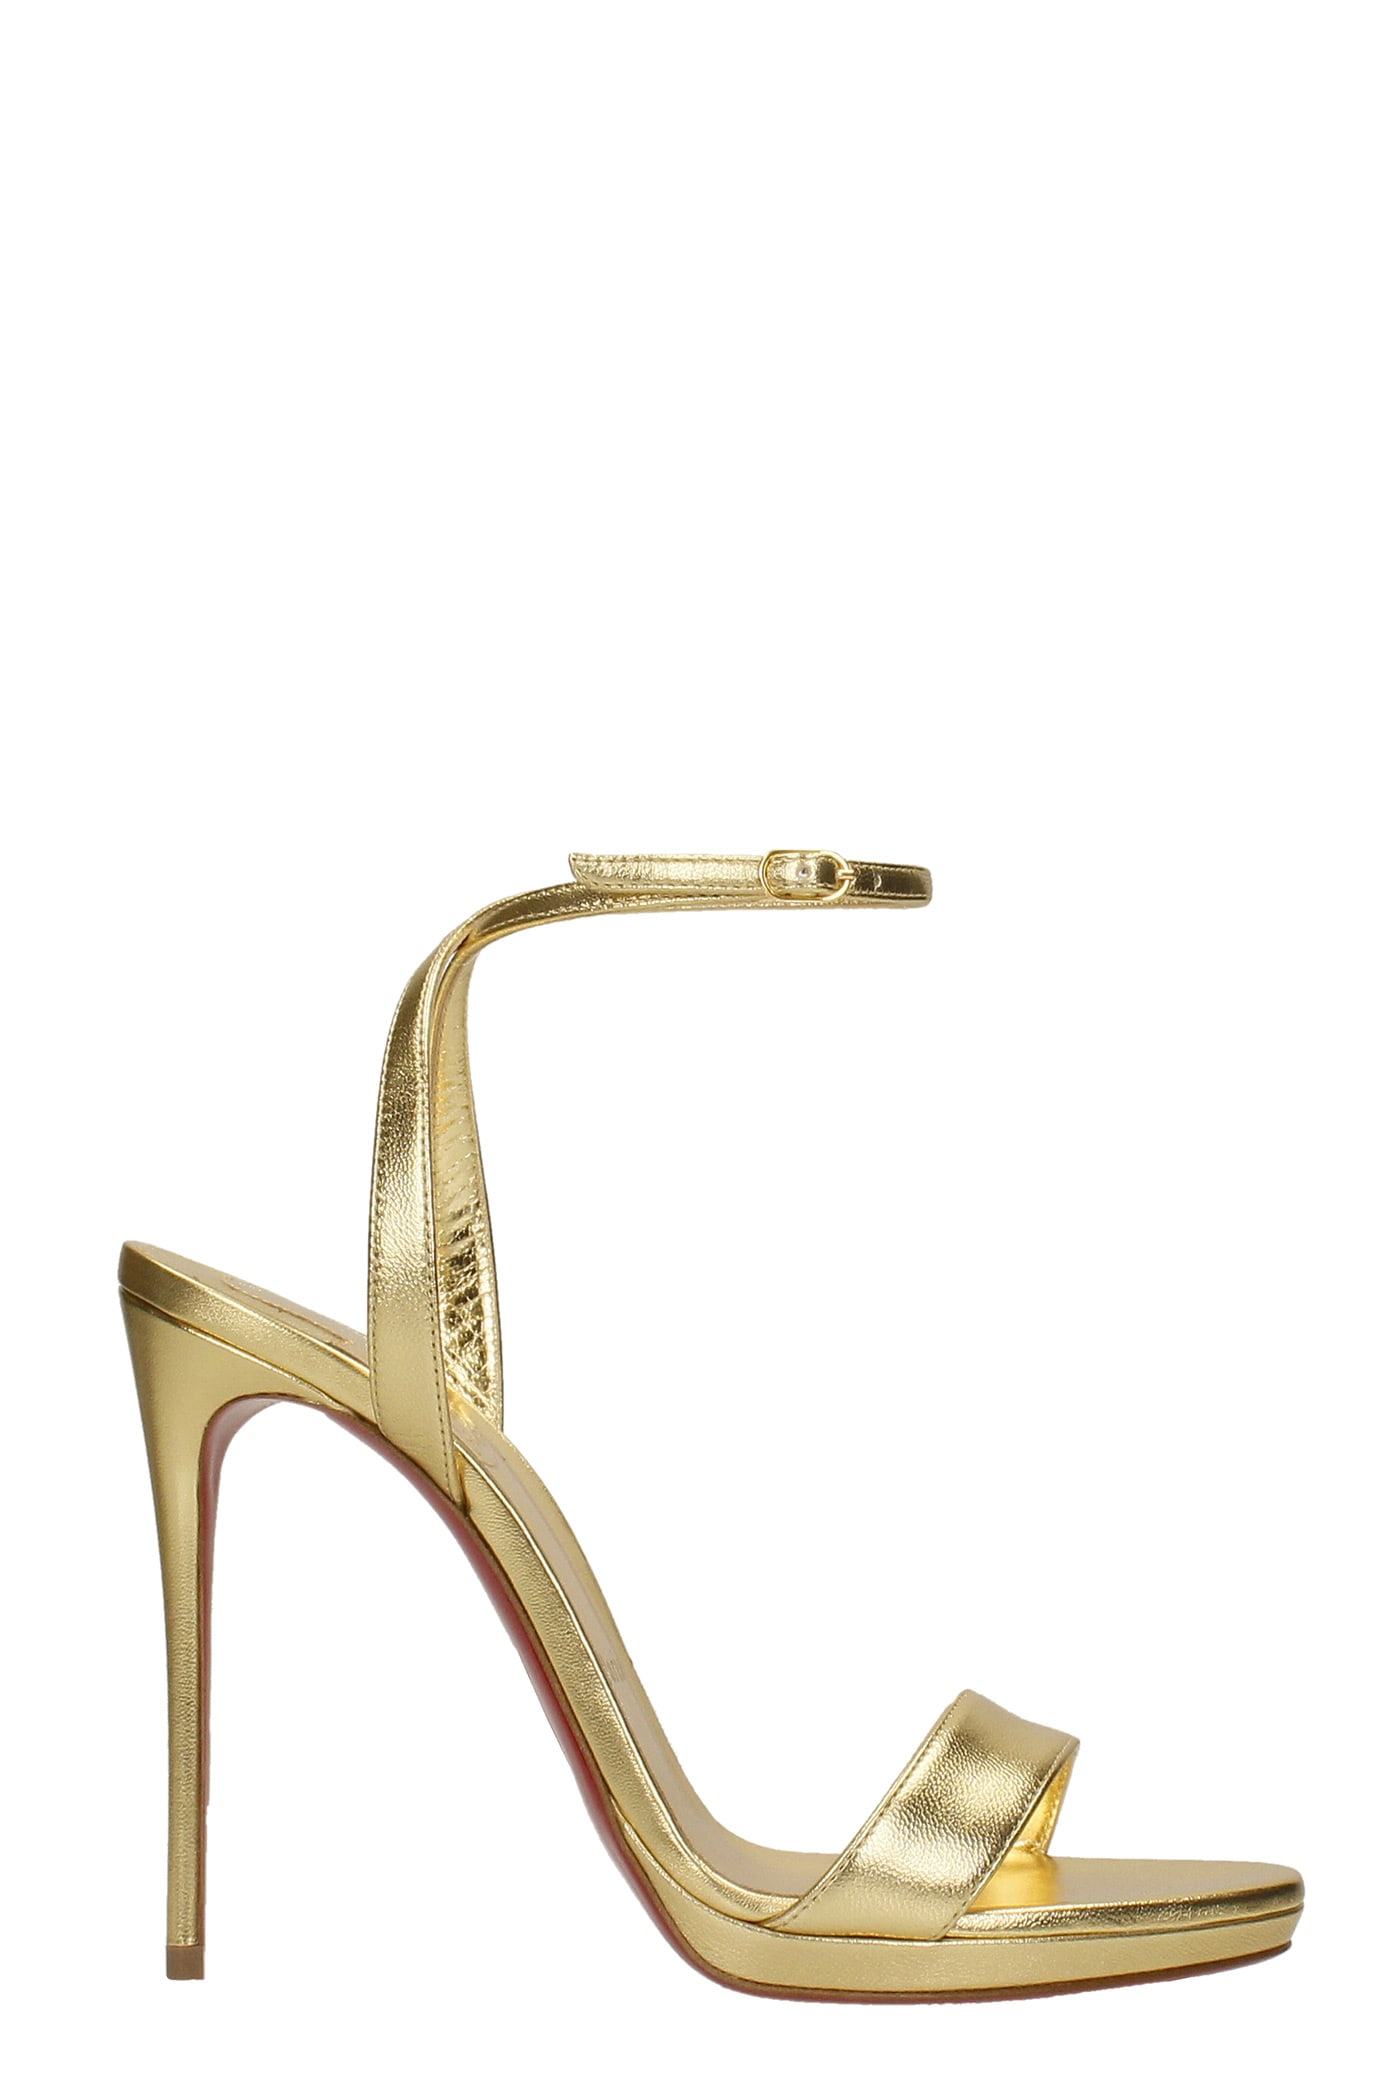 Christian Louboutin Loubi Queen 120 Sandals In Gold Leather